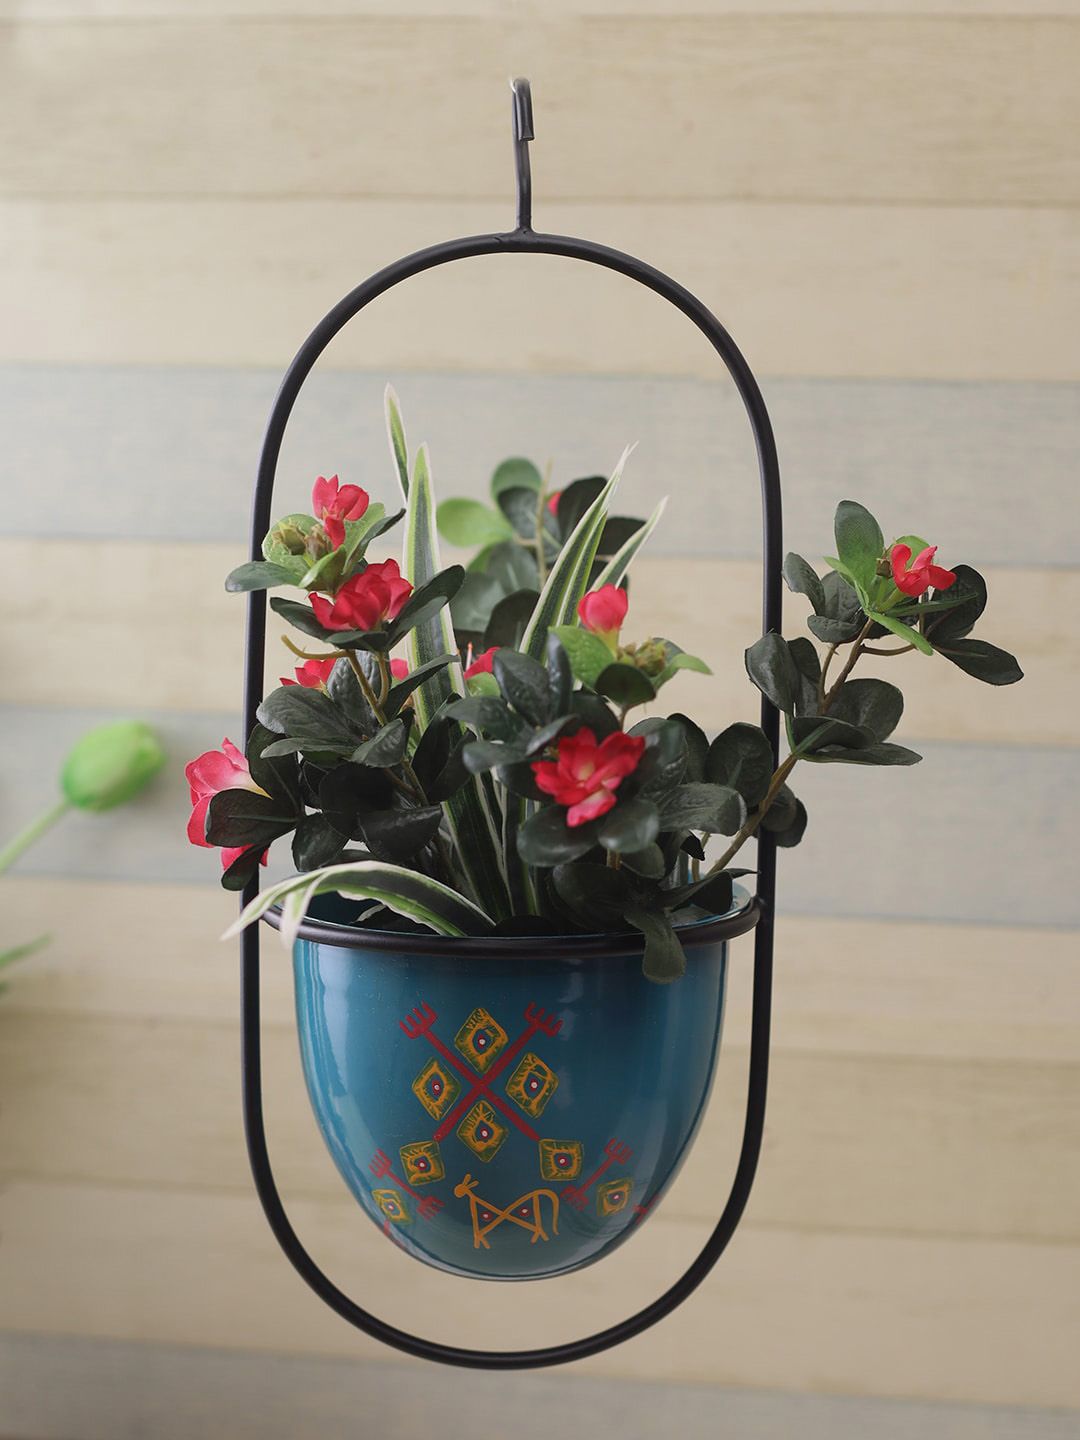 Aapno Rajasthan Teal Blue Oval Shaped Hanging Planter Price in India